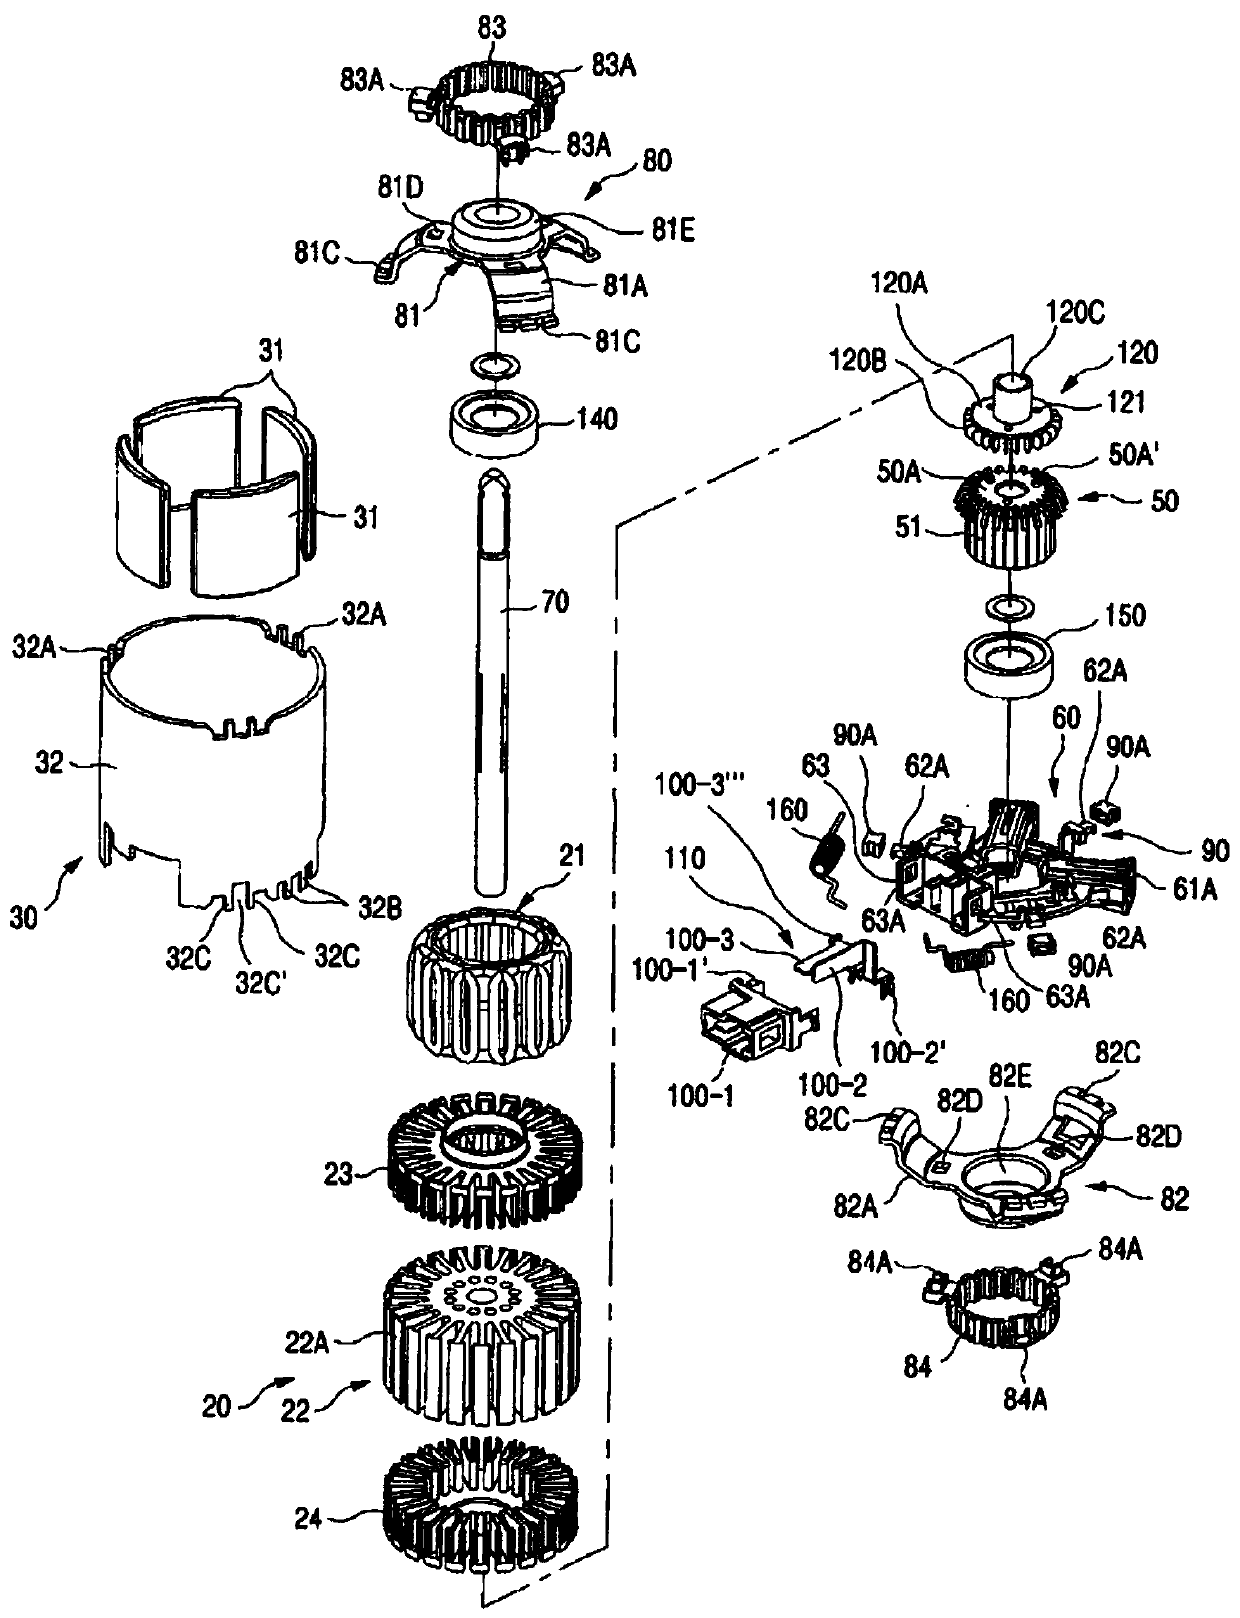 Direct current motor for vehicle